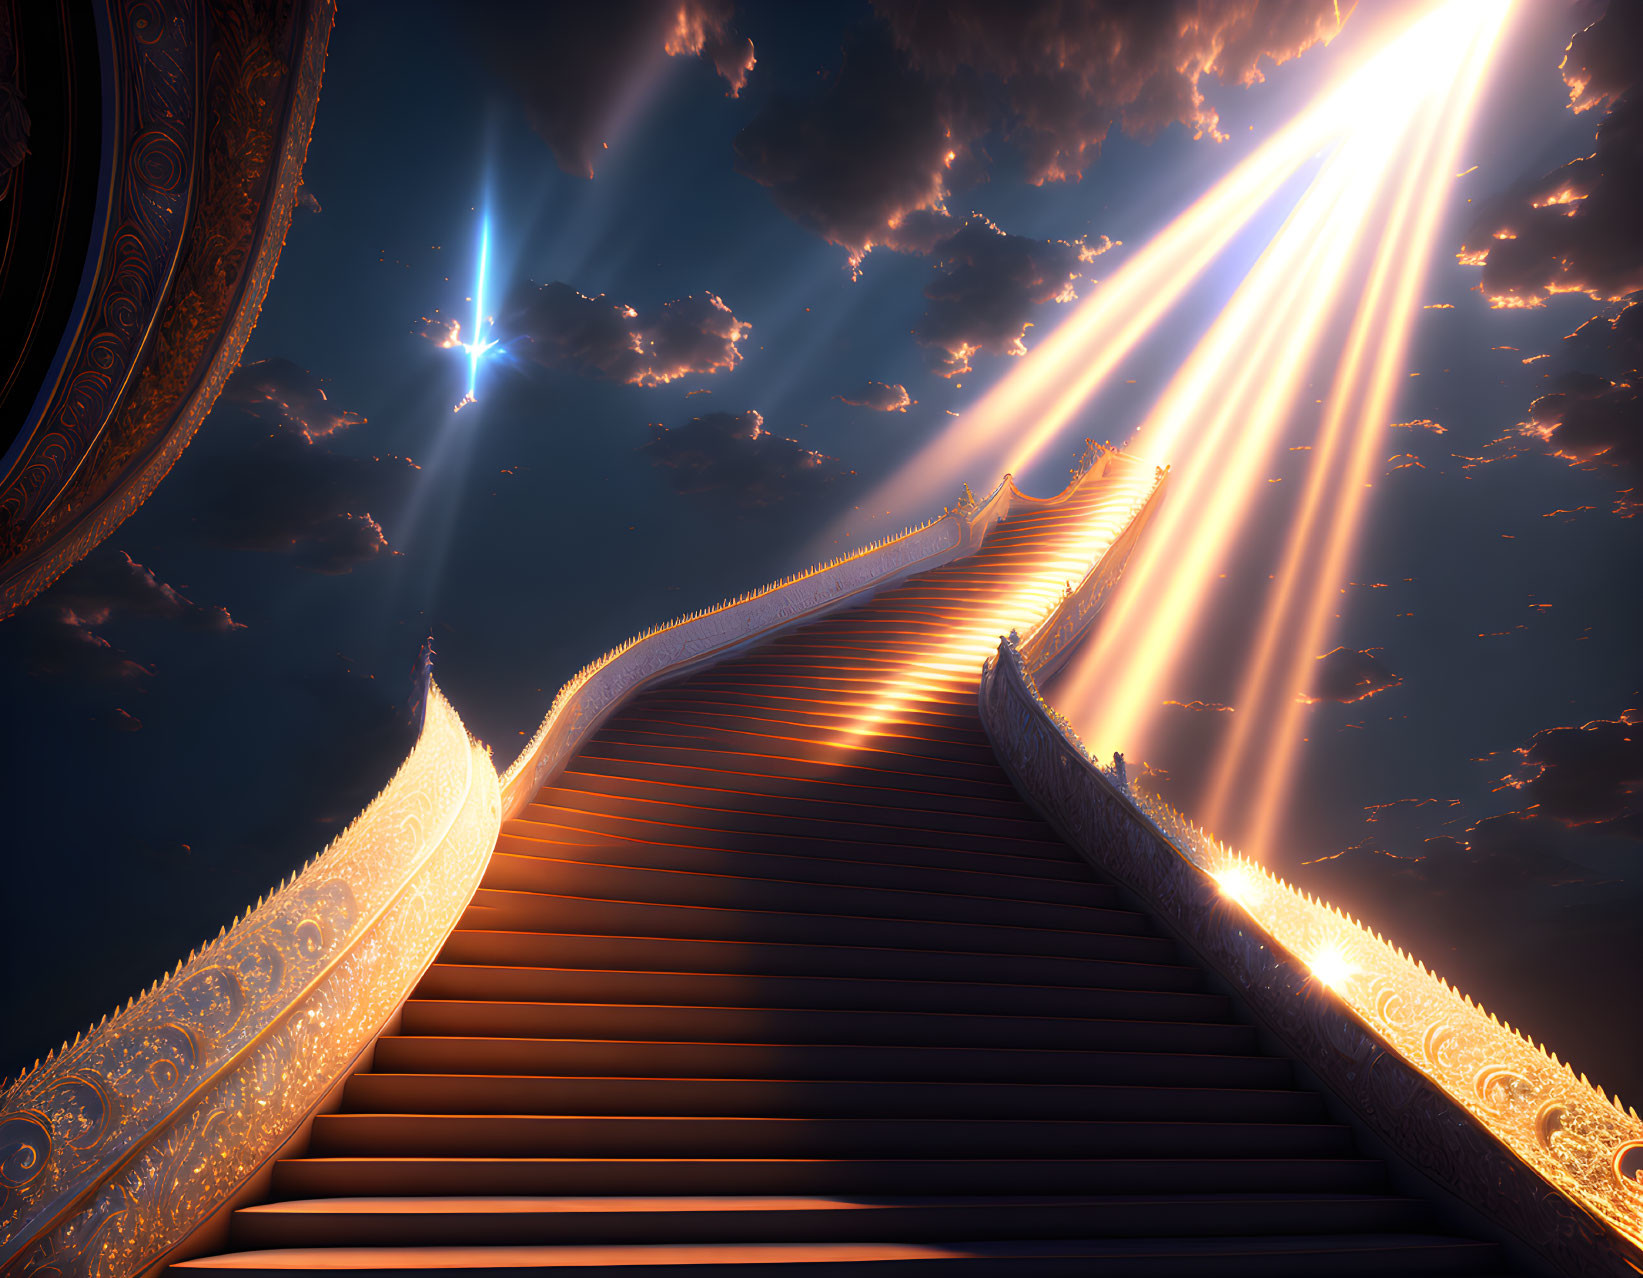 Ornate staircase leading to radiant sky with sunbeam and clouds